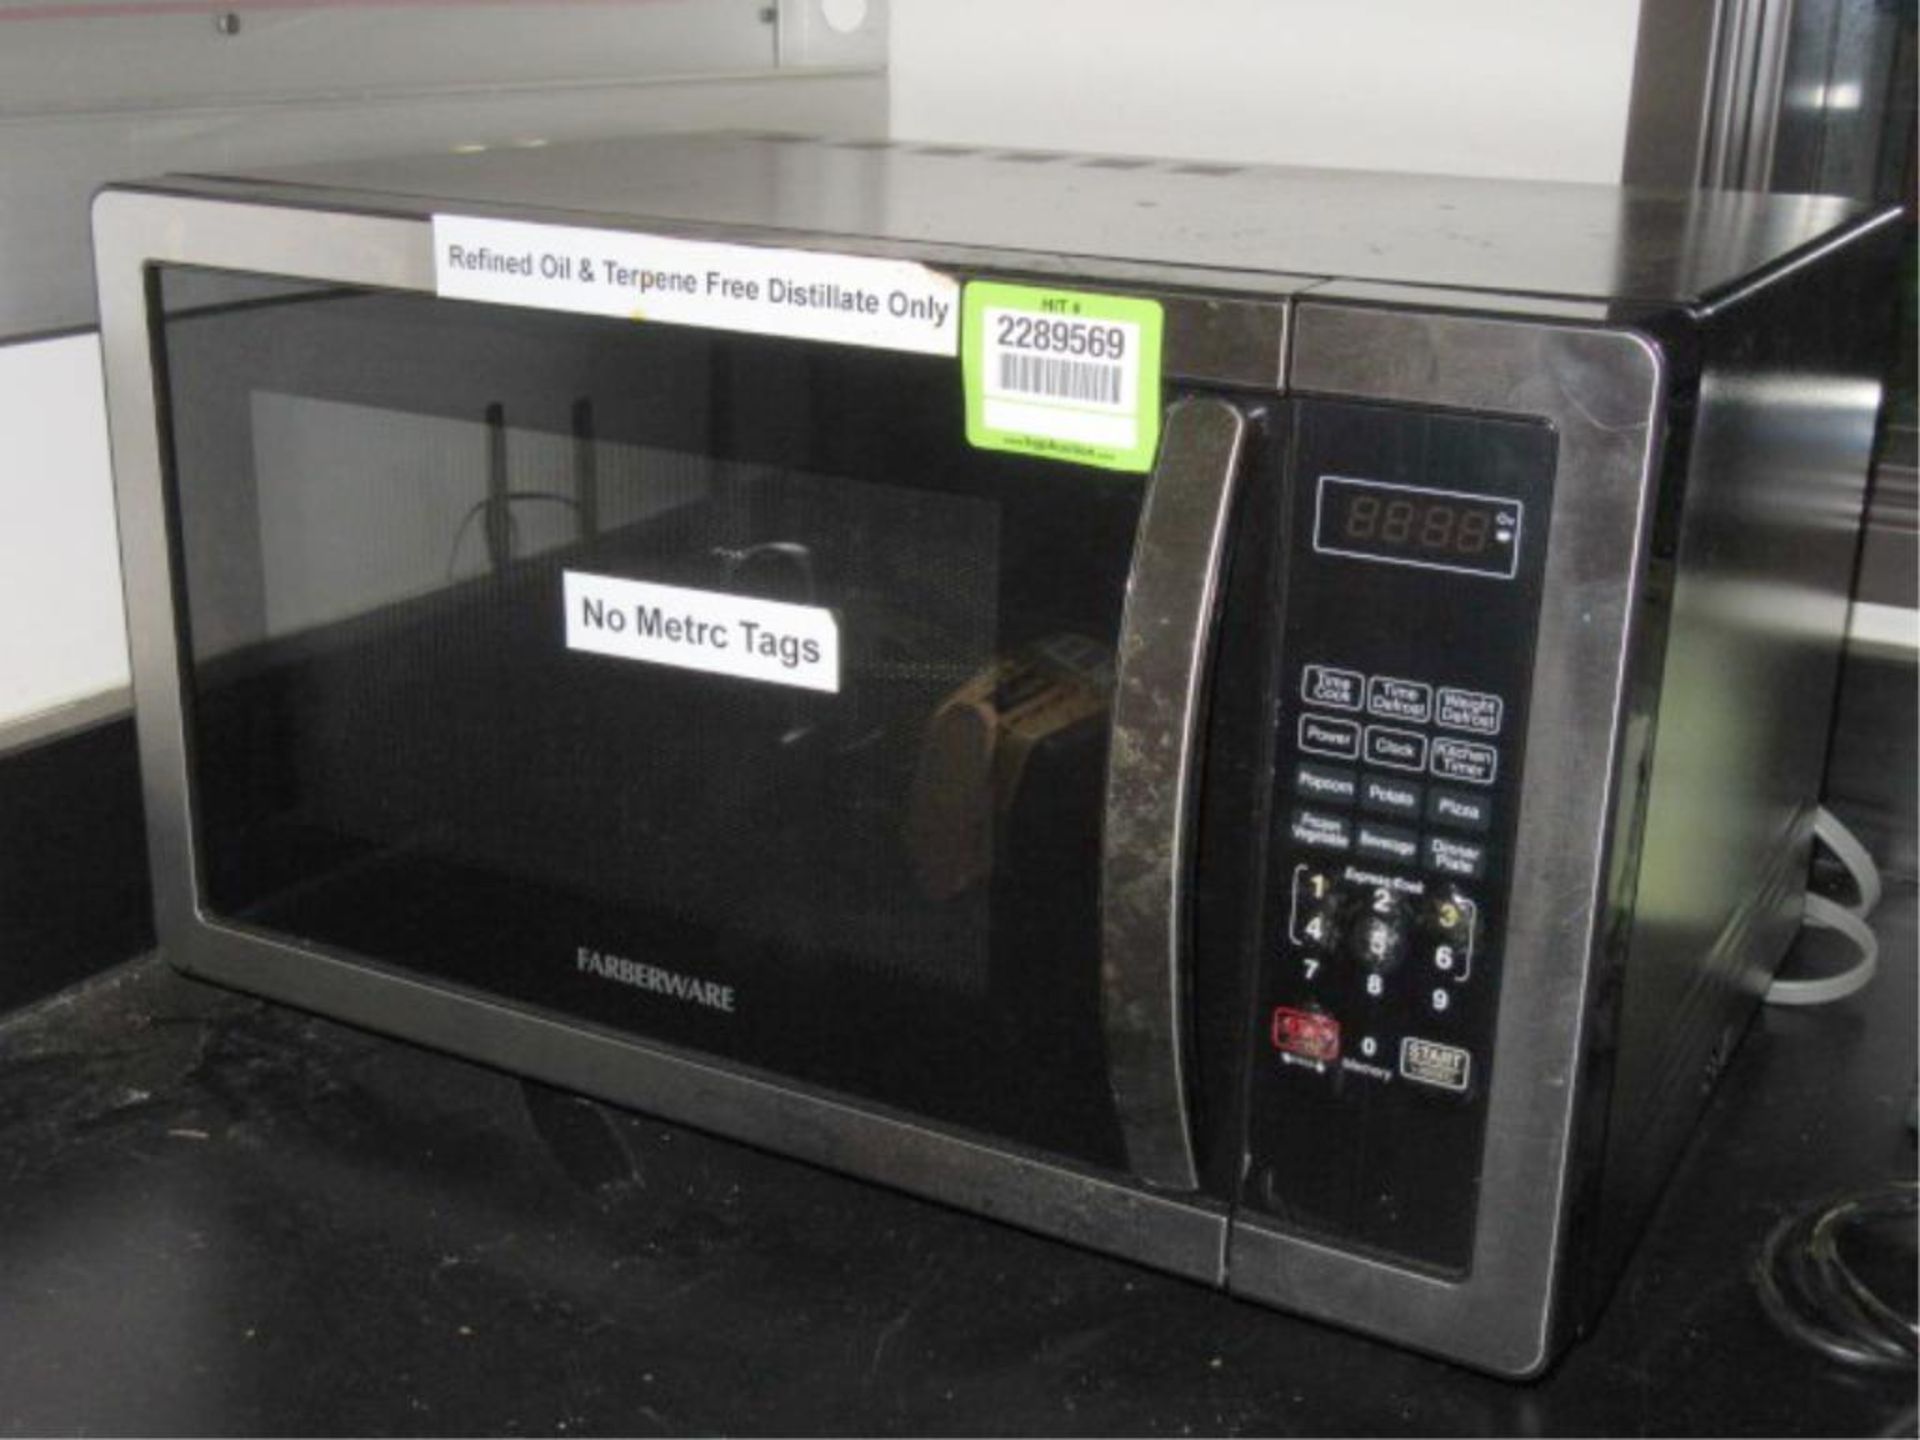 Farber Ware Microwave Oven